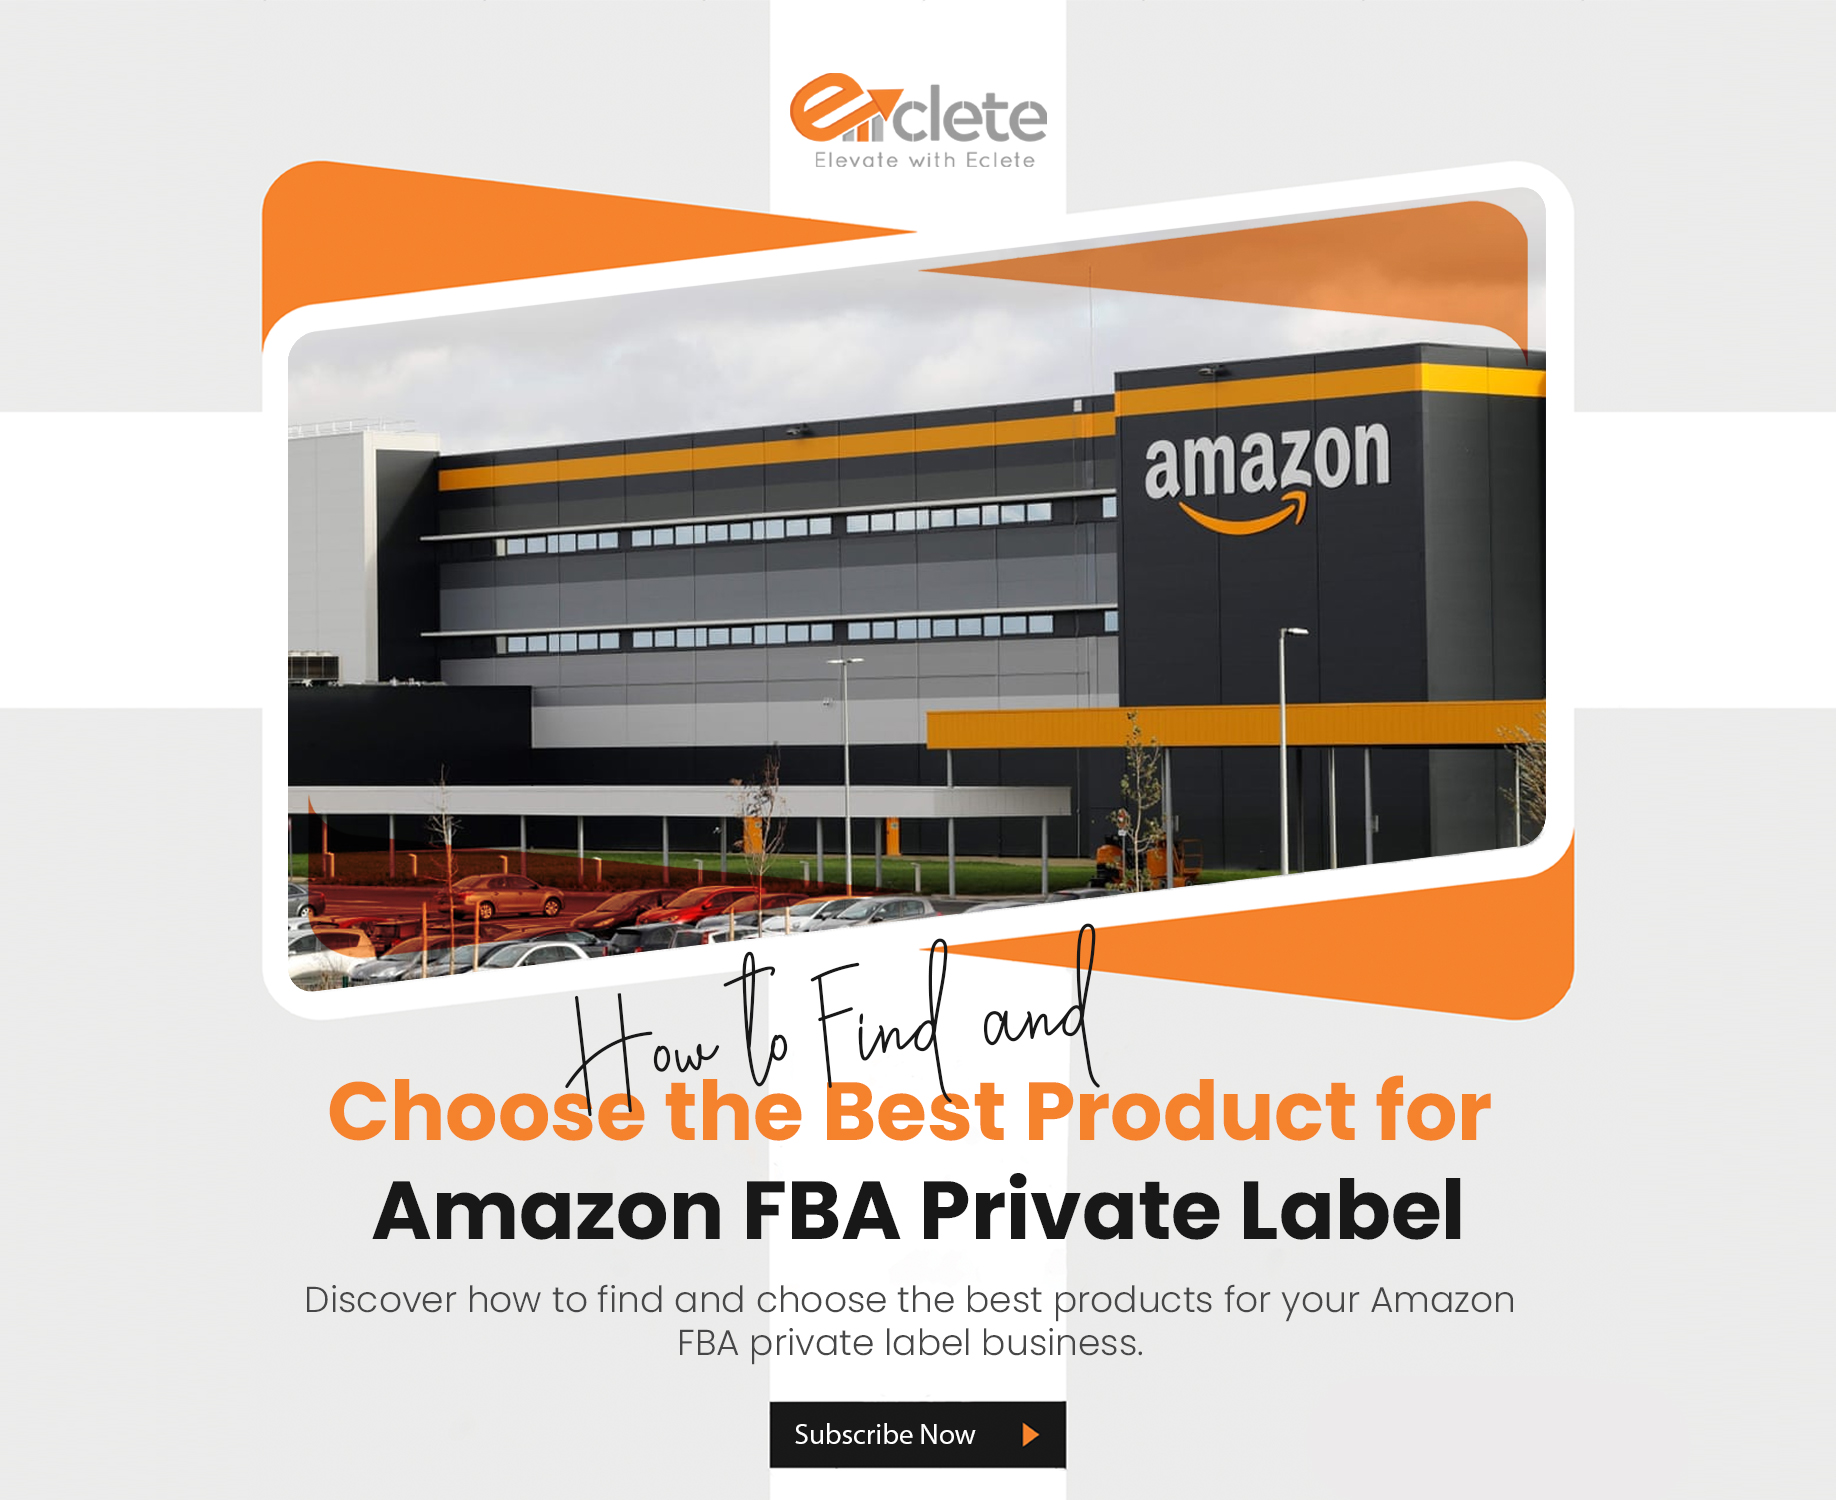 Find and Choose the Best Product for Amazon